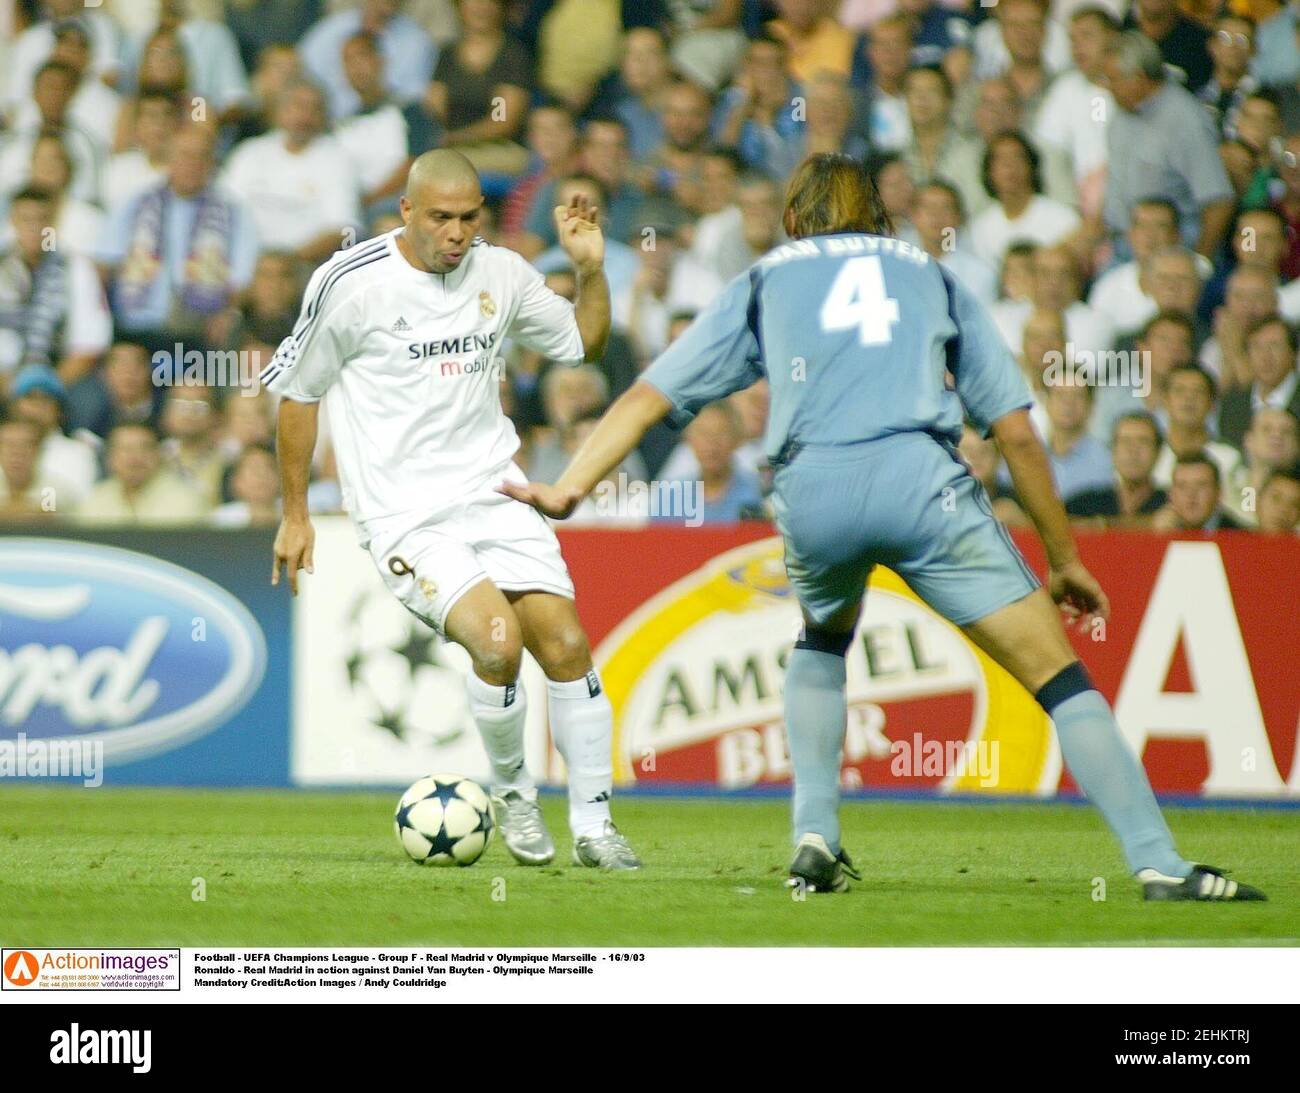 Football - UEFA Champions League - Group F - Real Madrid v Olympique  Marseille - 16/9/03 Ronaldo - Real Madrid in action against Daniel Van  Buyten - Olympique Marseille Mandatory Credit:Action Images / Andy  Couldridge Stock Photo - Alamy